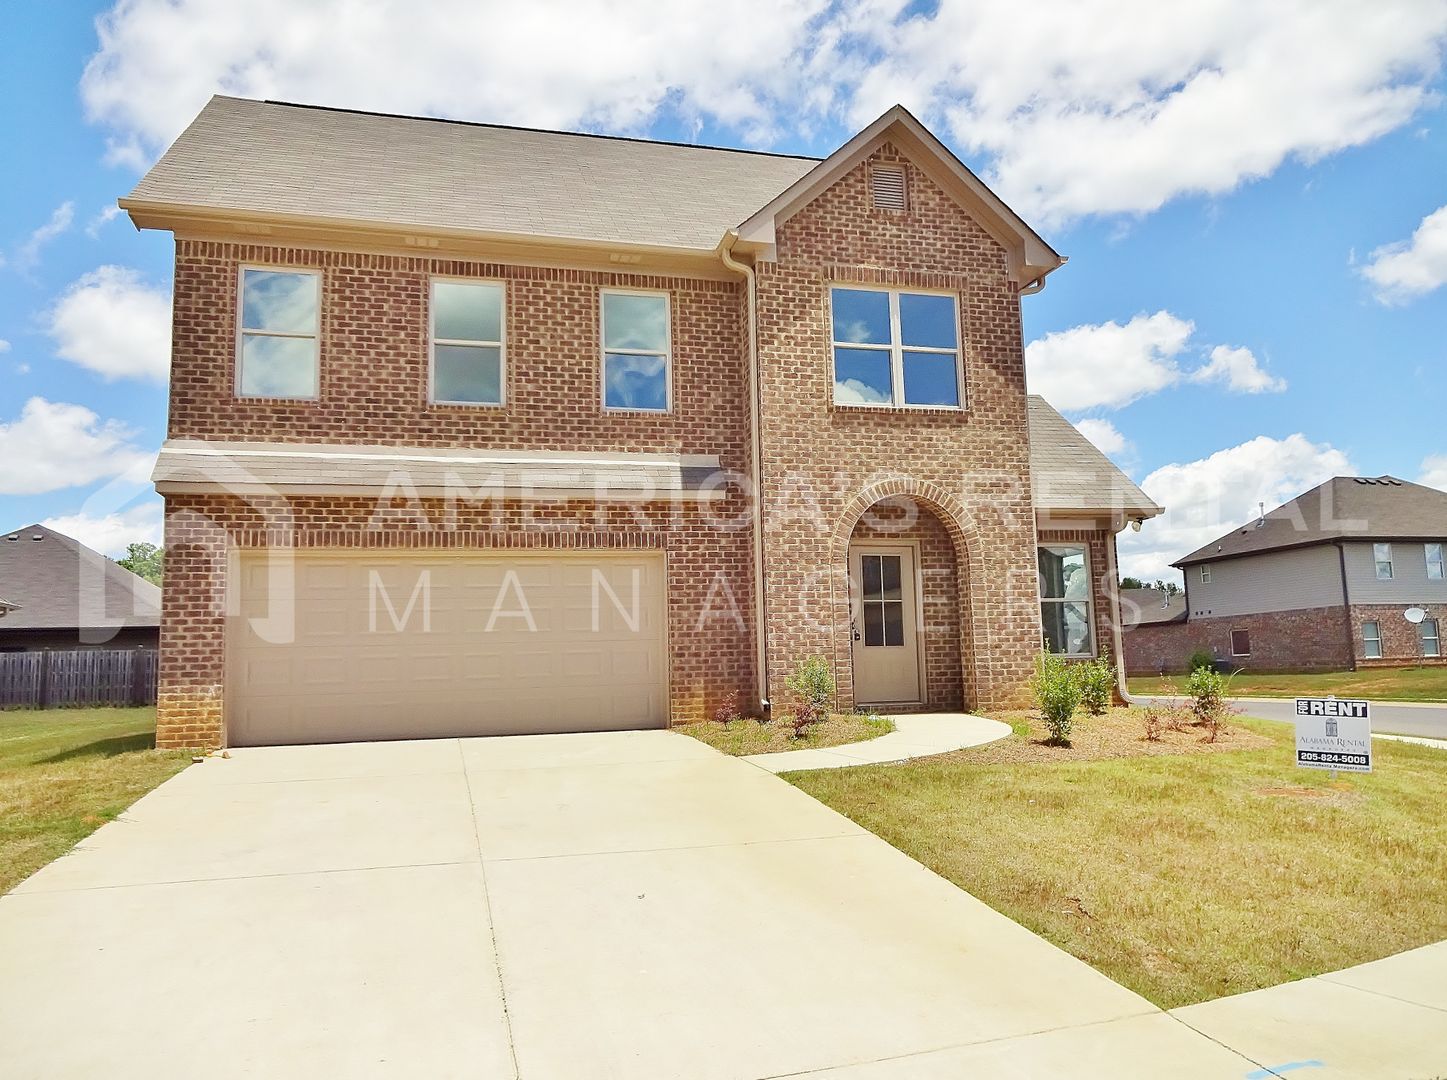 Home in Tuscaloosa... AVAILABLE TO VIEW!!!